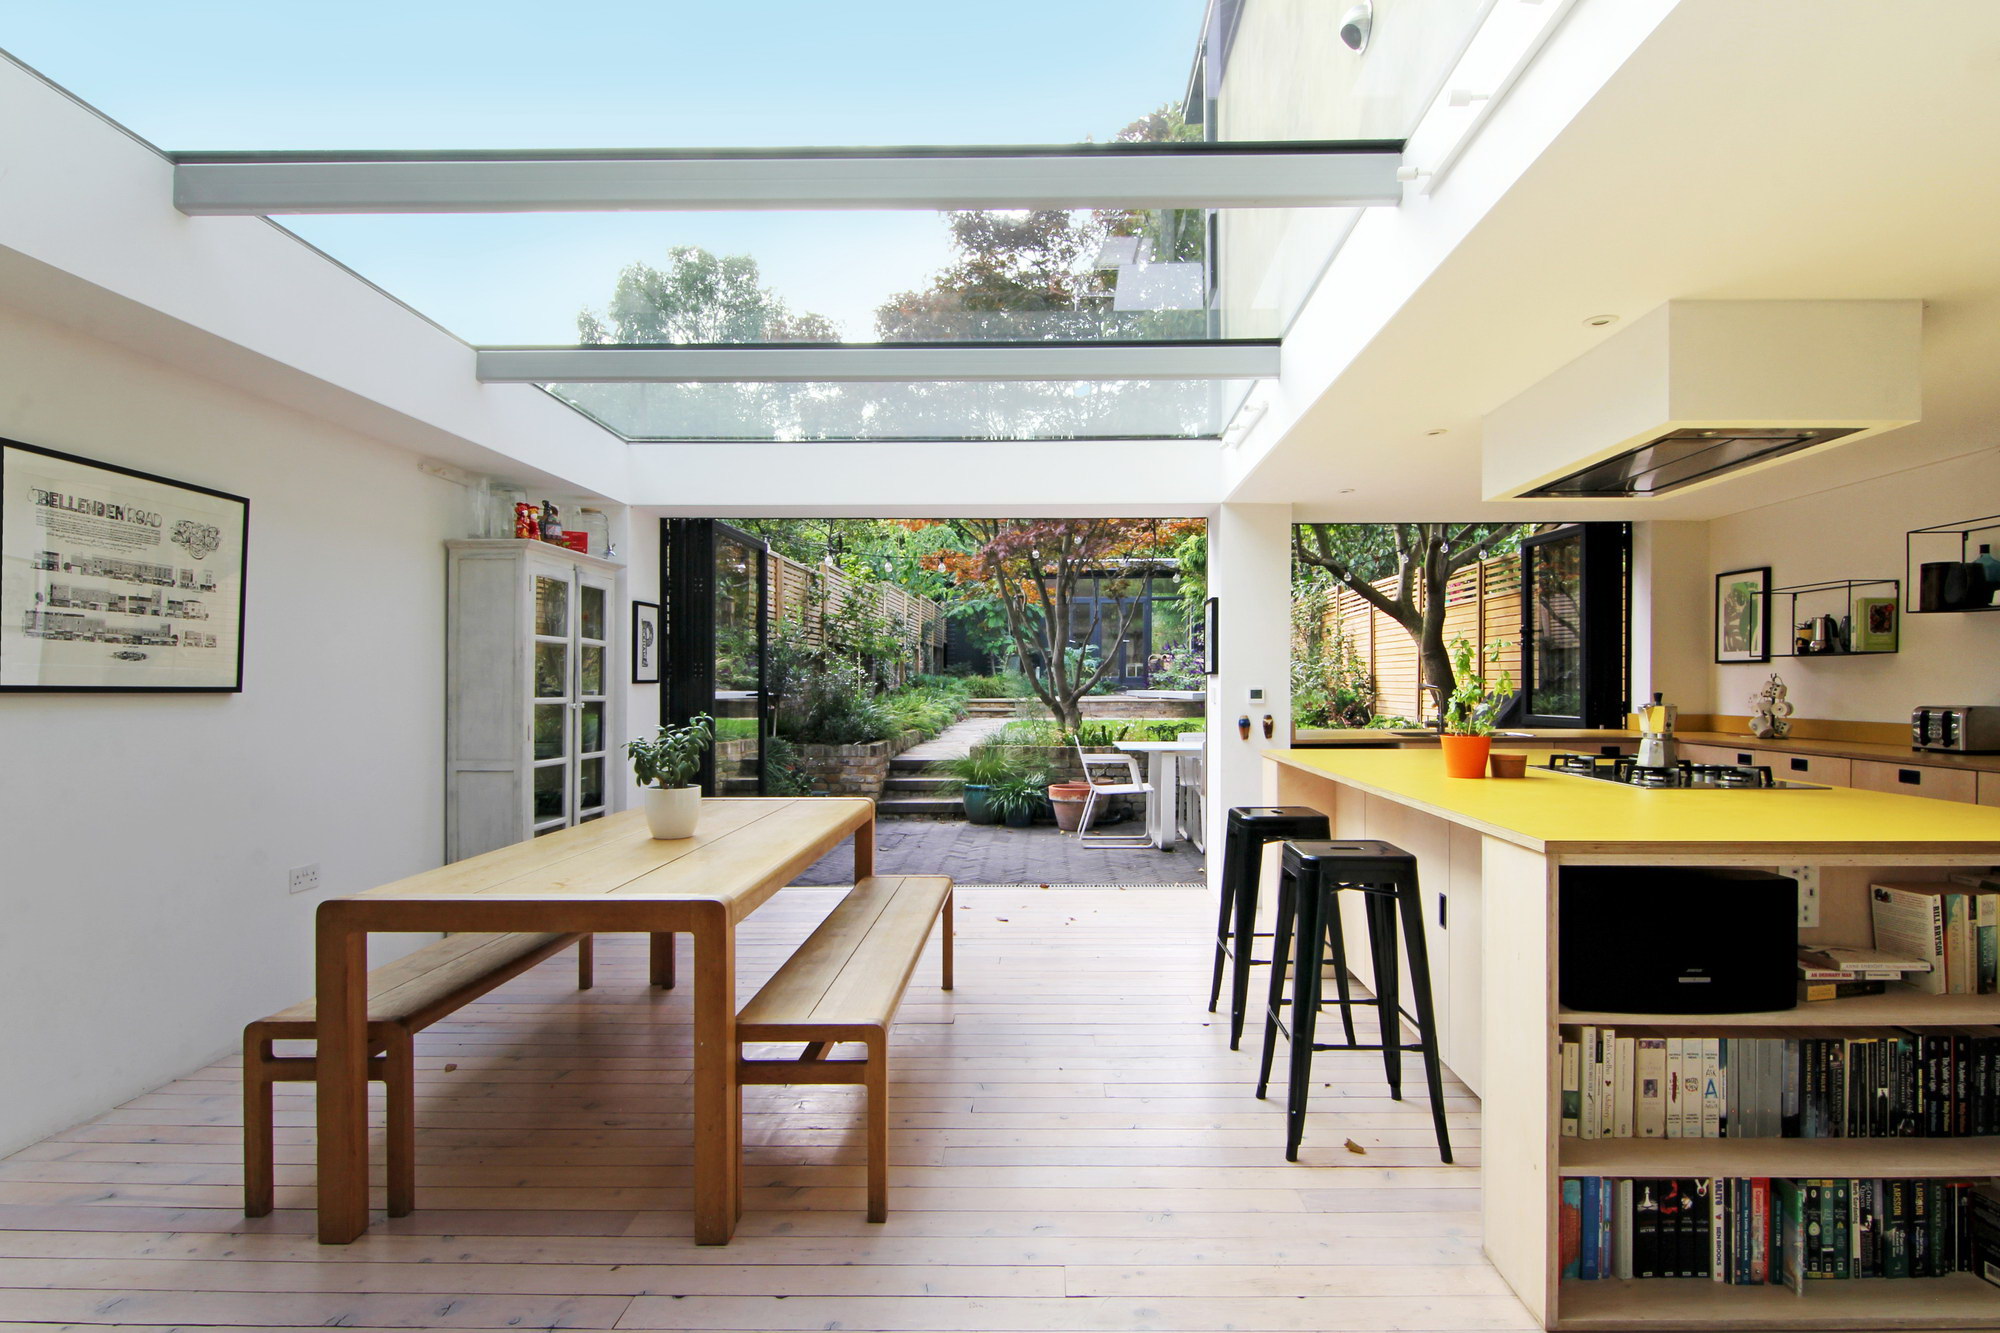 The Coach House | Terraced House Renovation by Studio 30 Architects